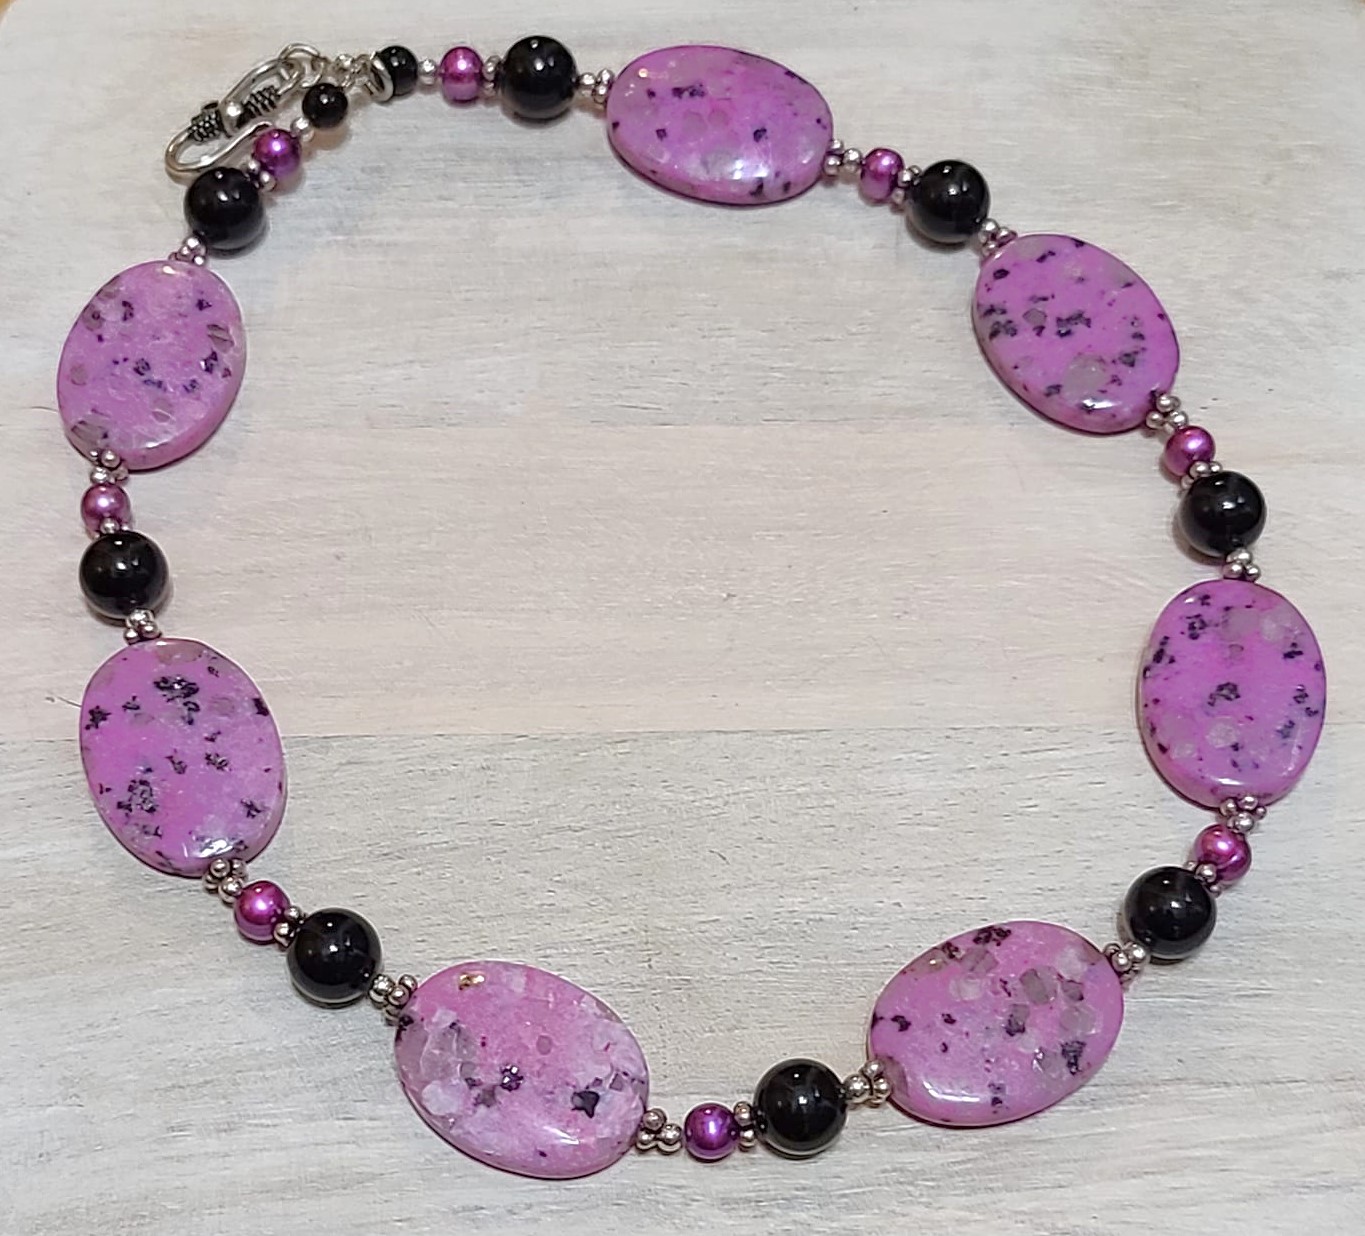 Gemstone necklace, handcrafted, violet damation jasper, onyx, freshwater pearls w/sterling silver clasp